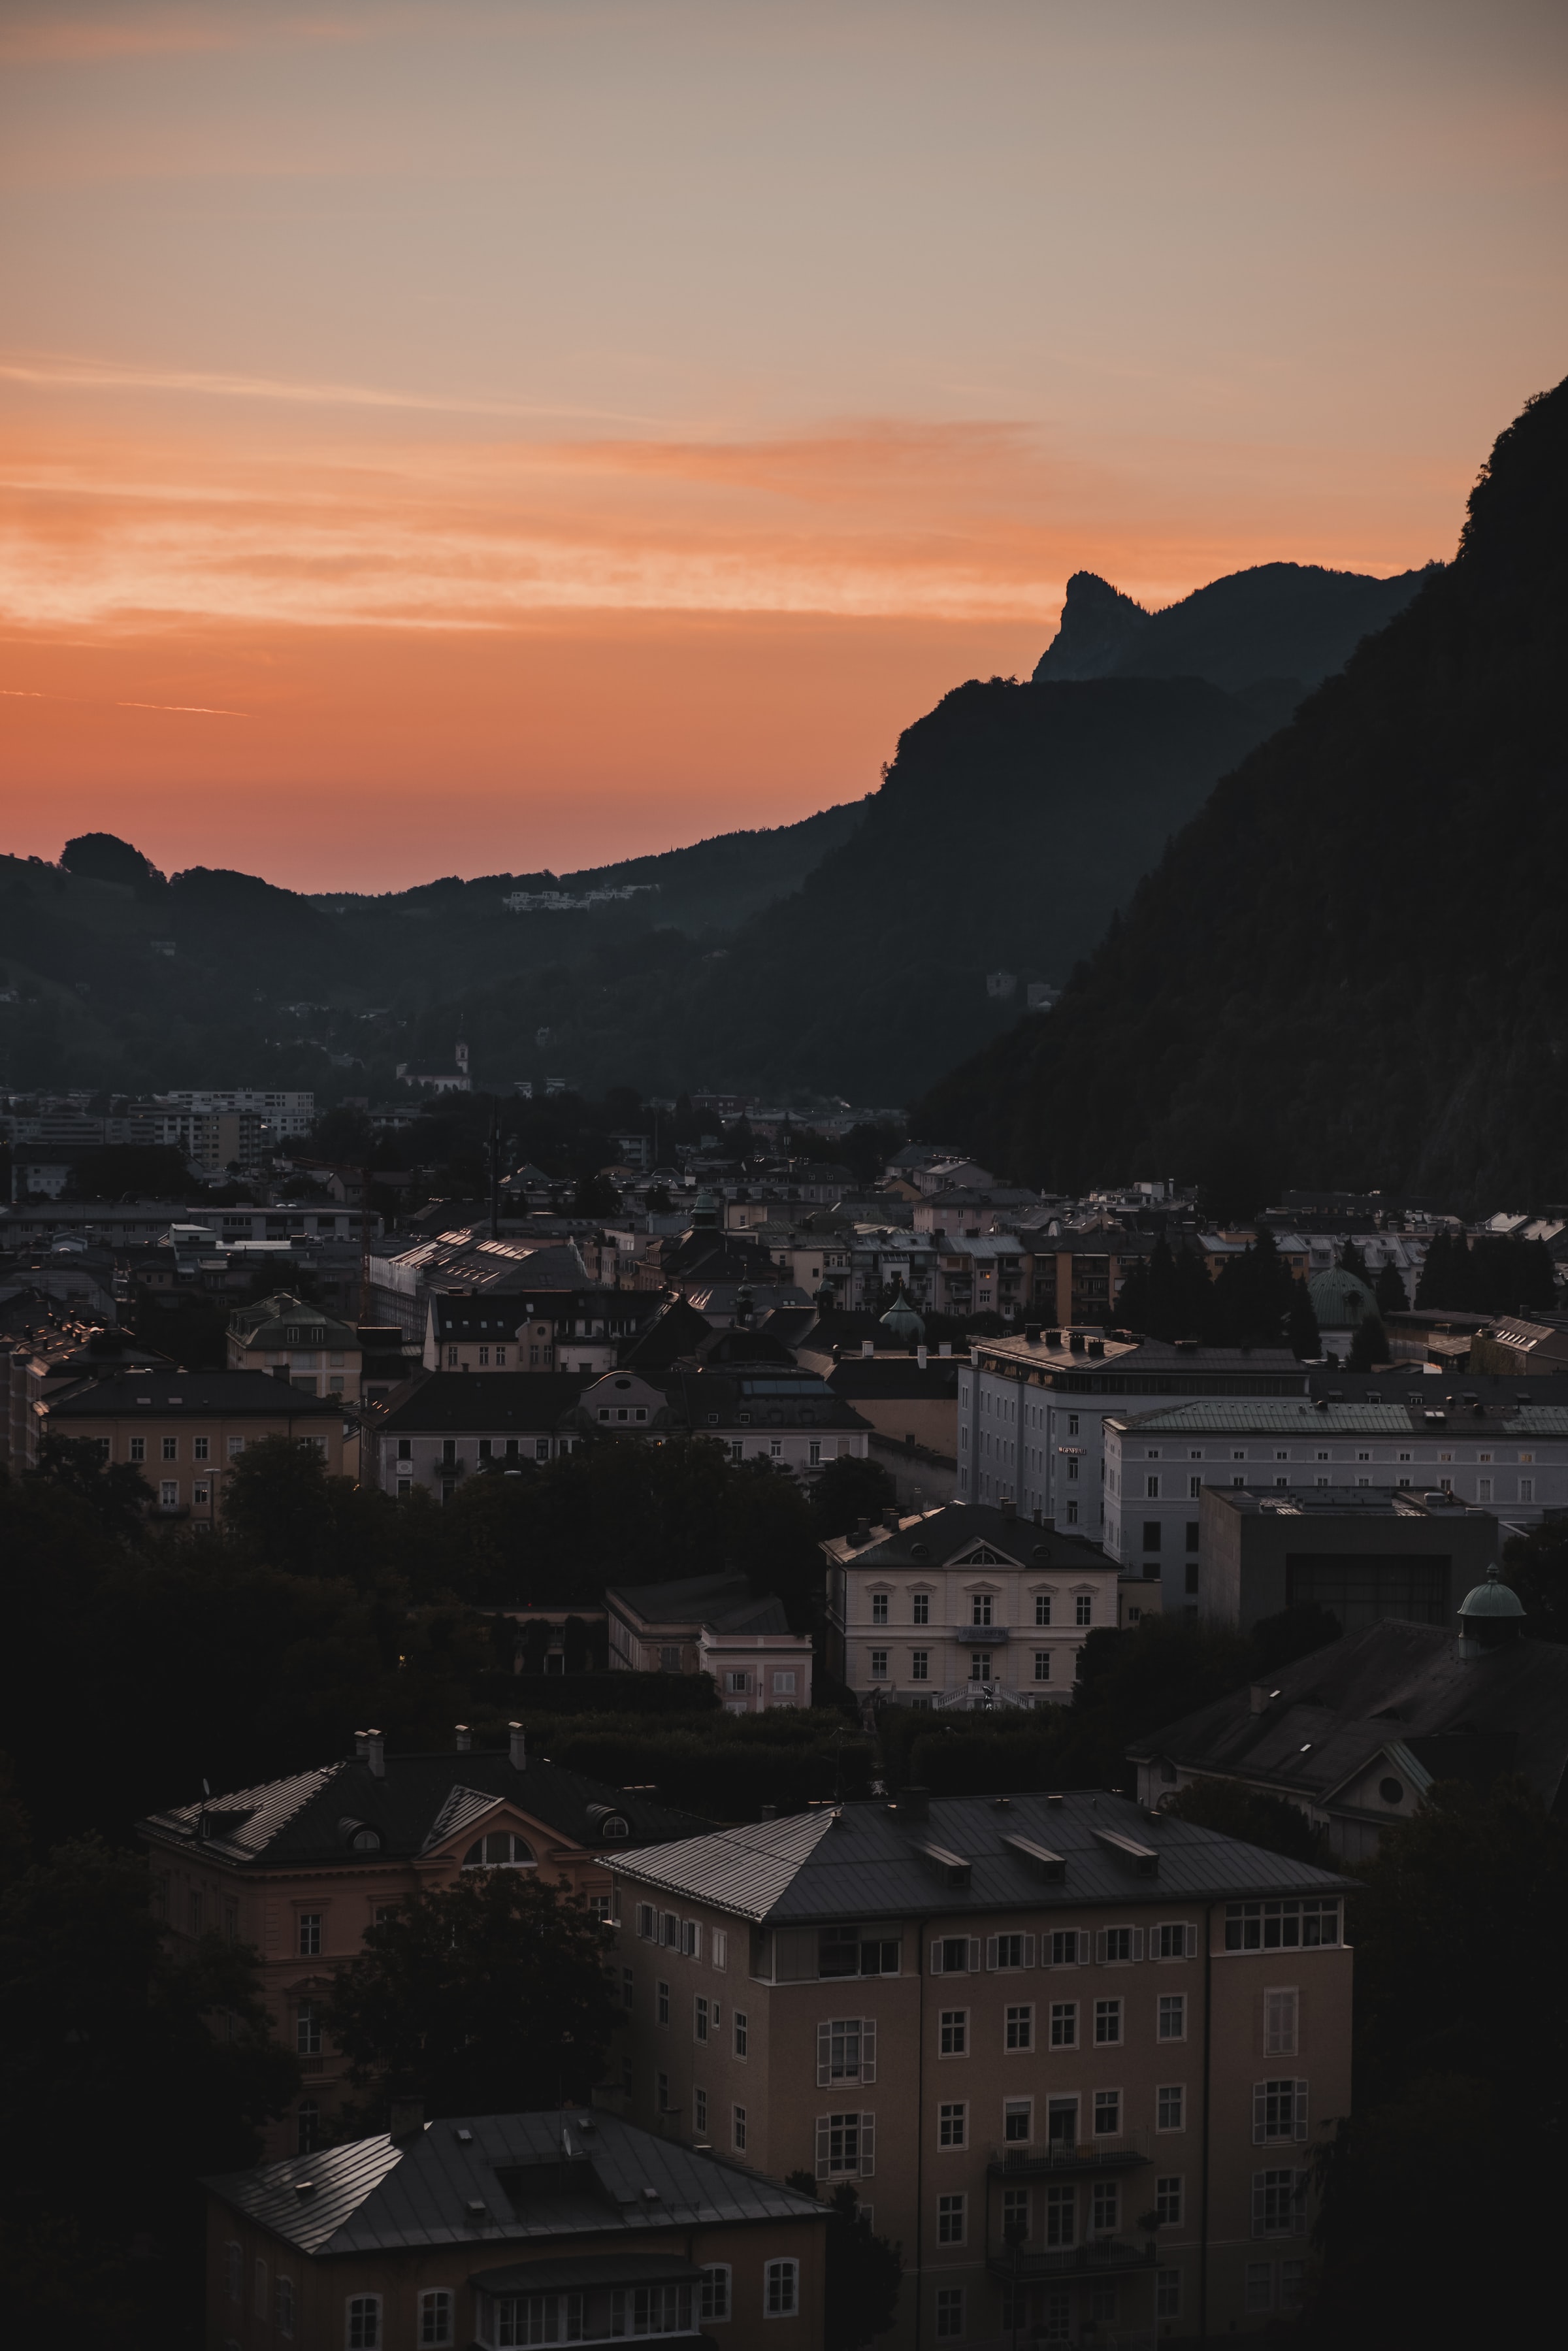 cities, sunset, city, building, hill, roof, roofs UHD